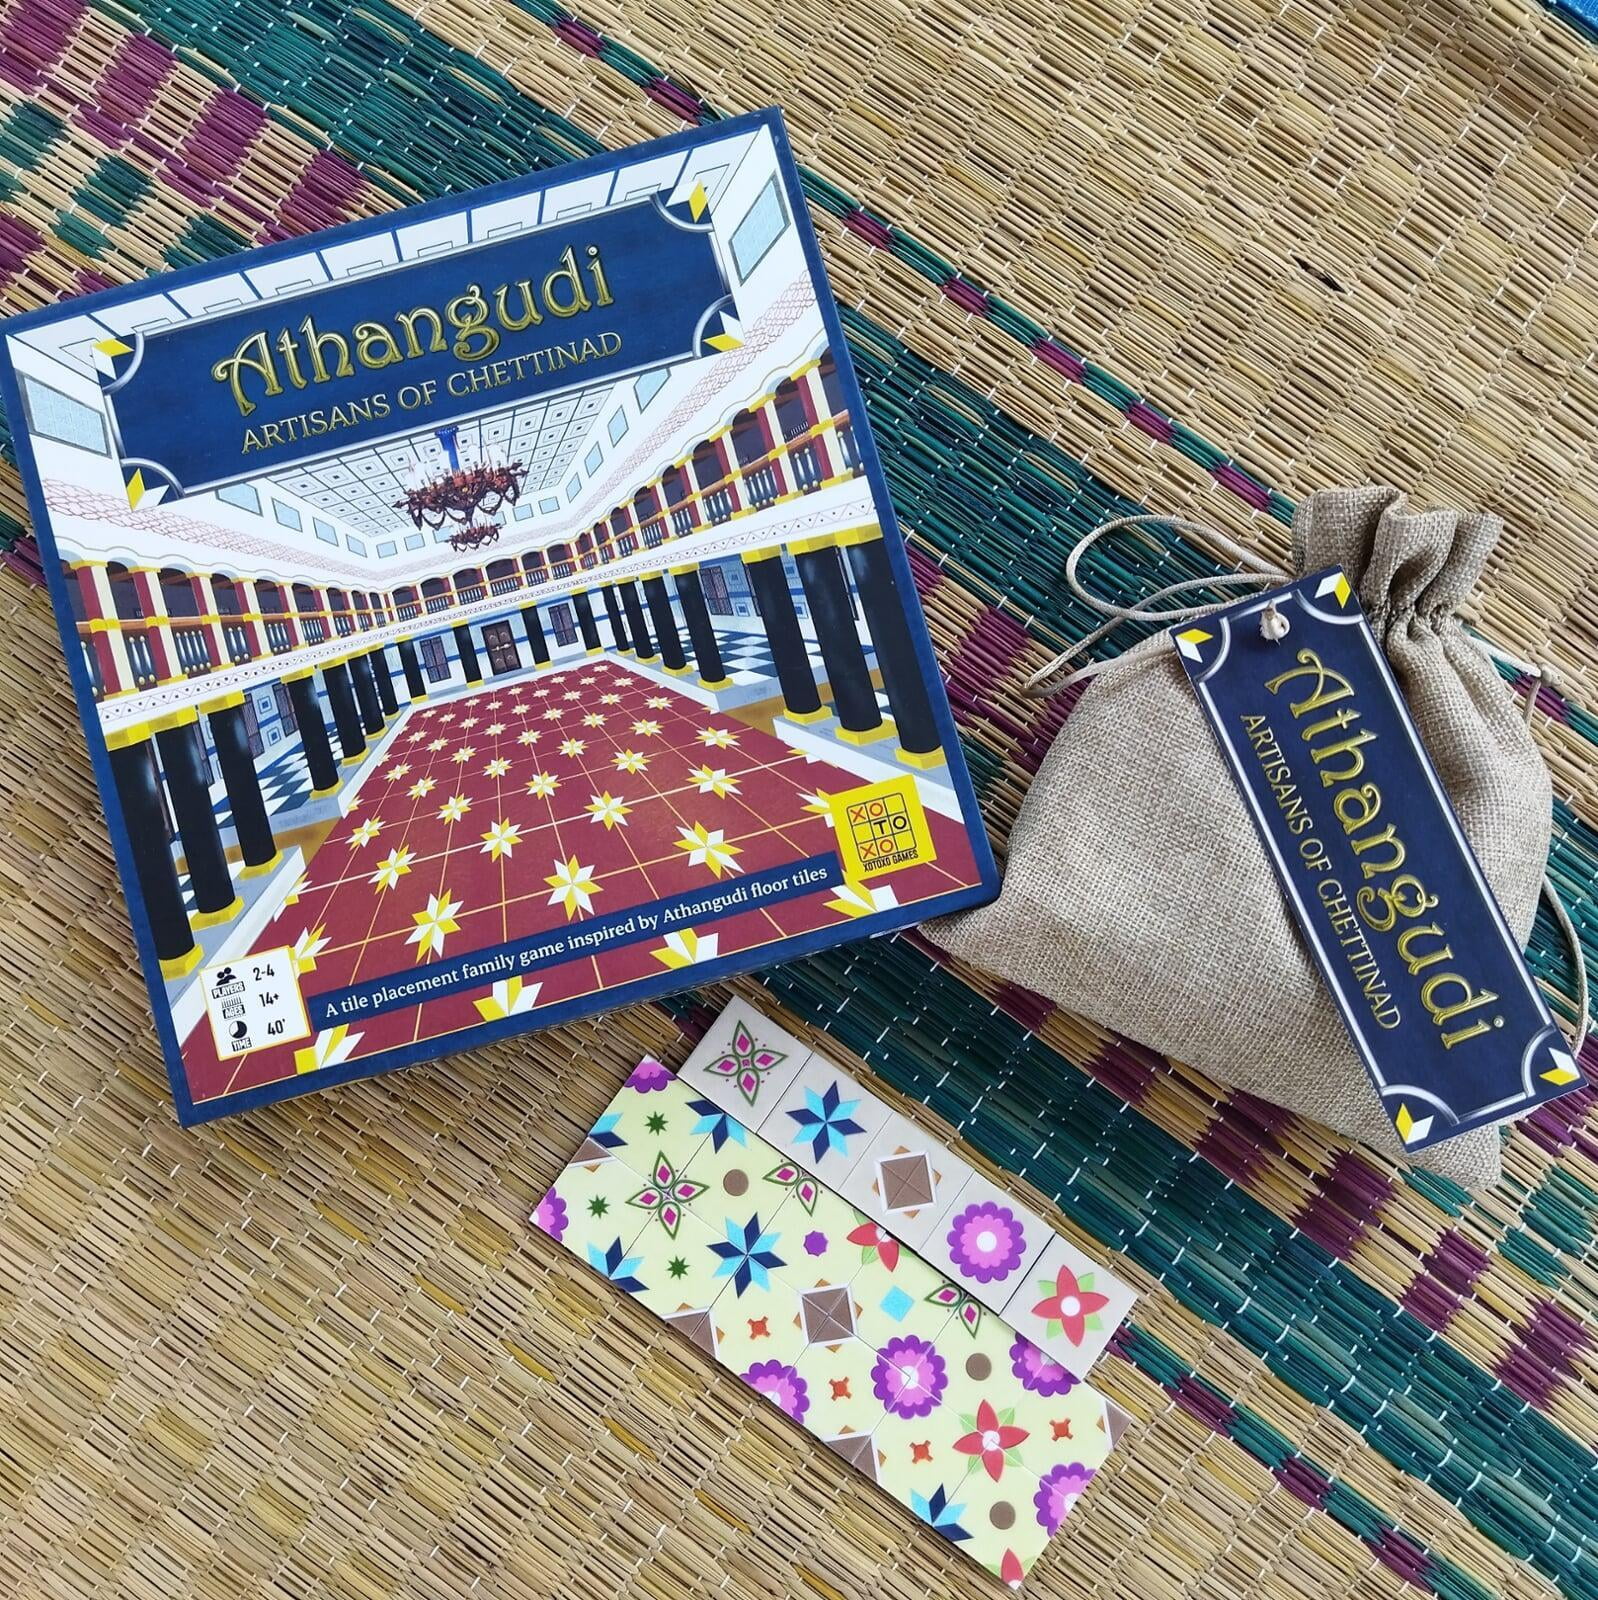 Boardgame named Athangudi: Artisans of Chettinad, placed next to a jute pouch, and some tiles from the game, on a straw mat